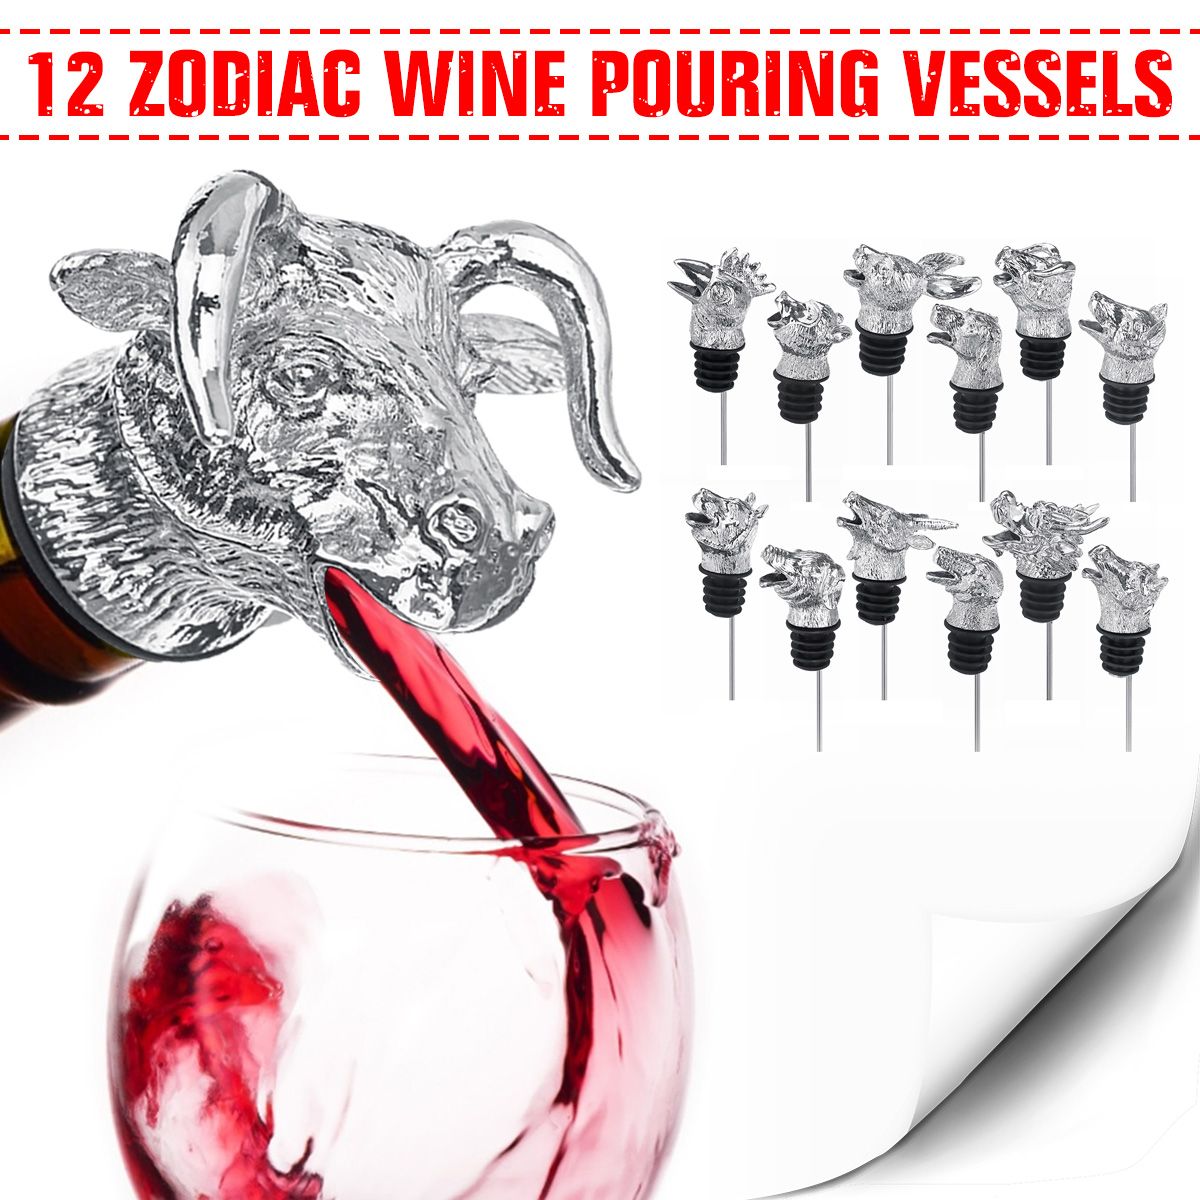 Household-12-Zodiac-Alcohol-Drinks-Decanter-Sober-Pour-Vessel-Liquor-Pouring-Mouth-Table-Decorations-1587887